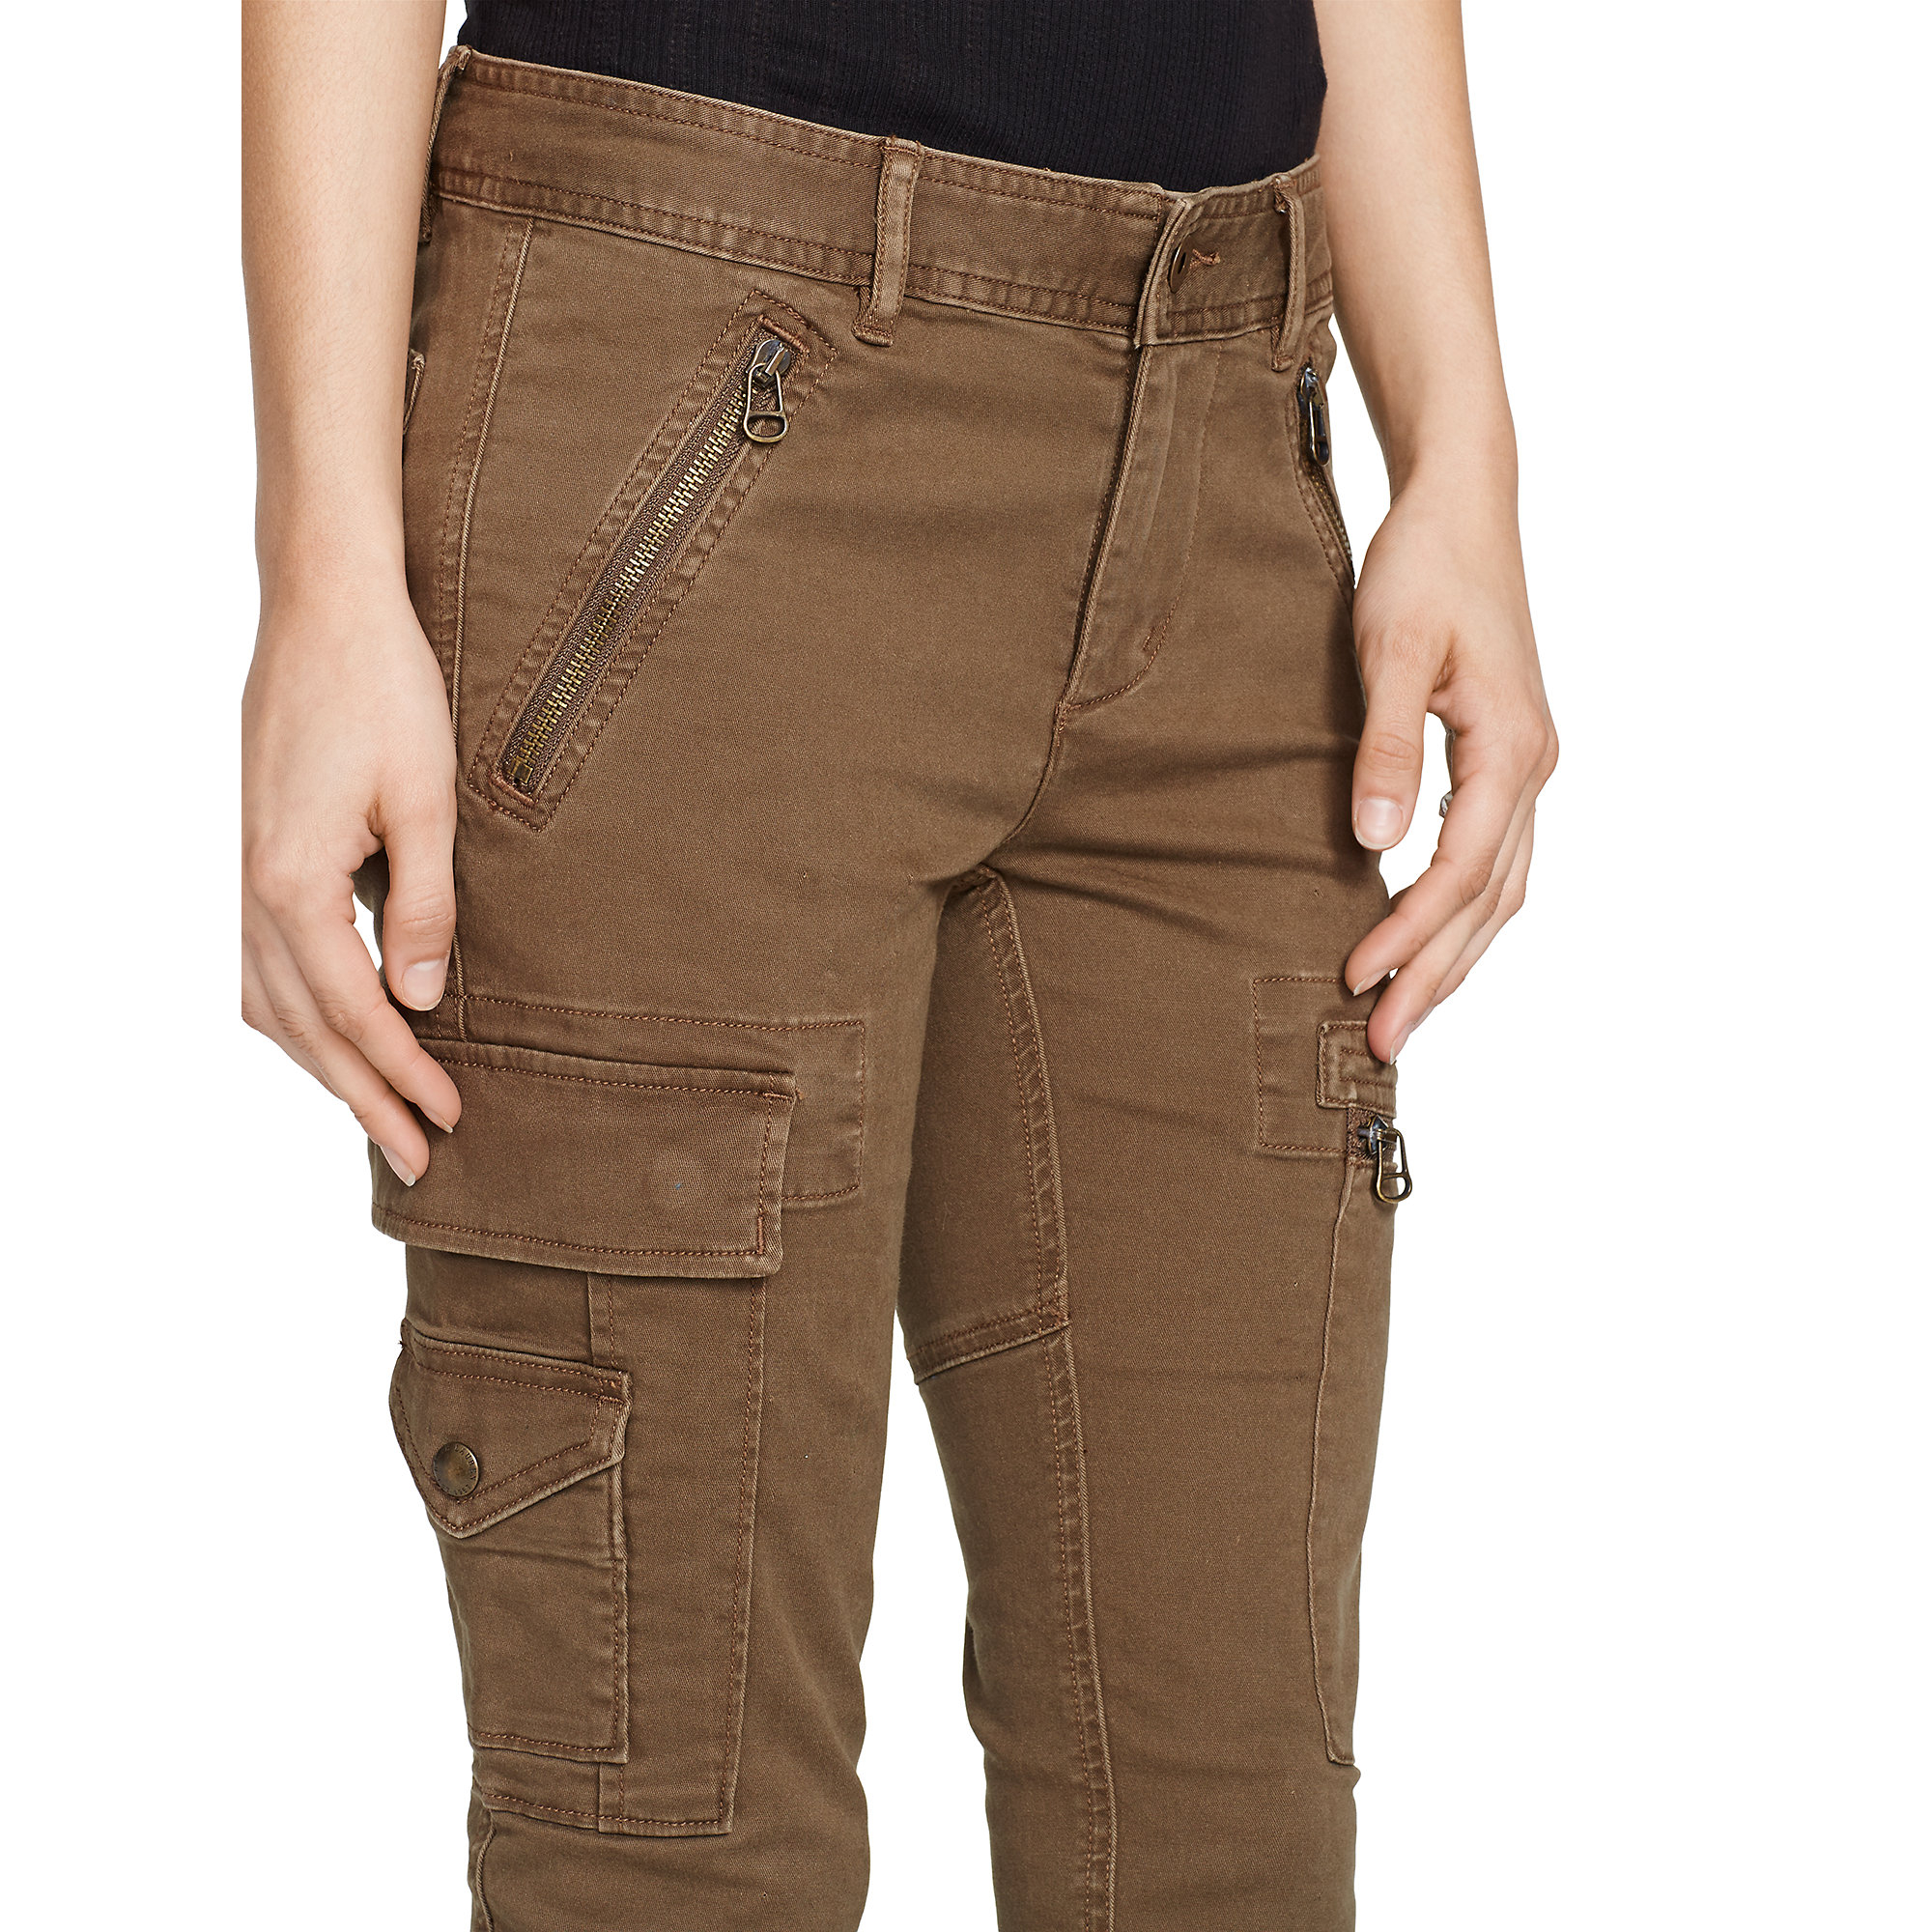 Lyst - Polo Ralph Lauren Stretch Skinny Cargo Pant in Brown